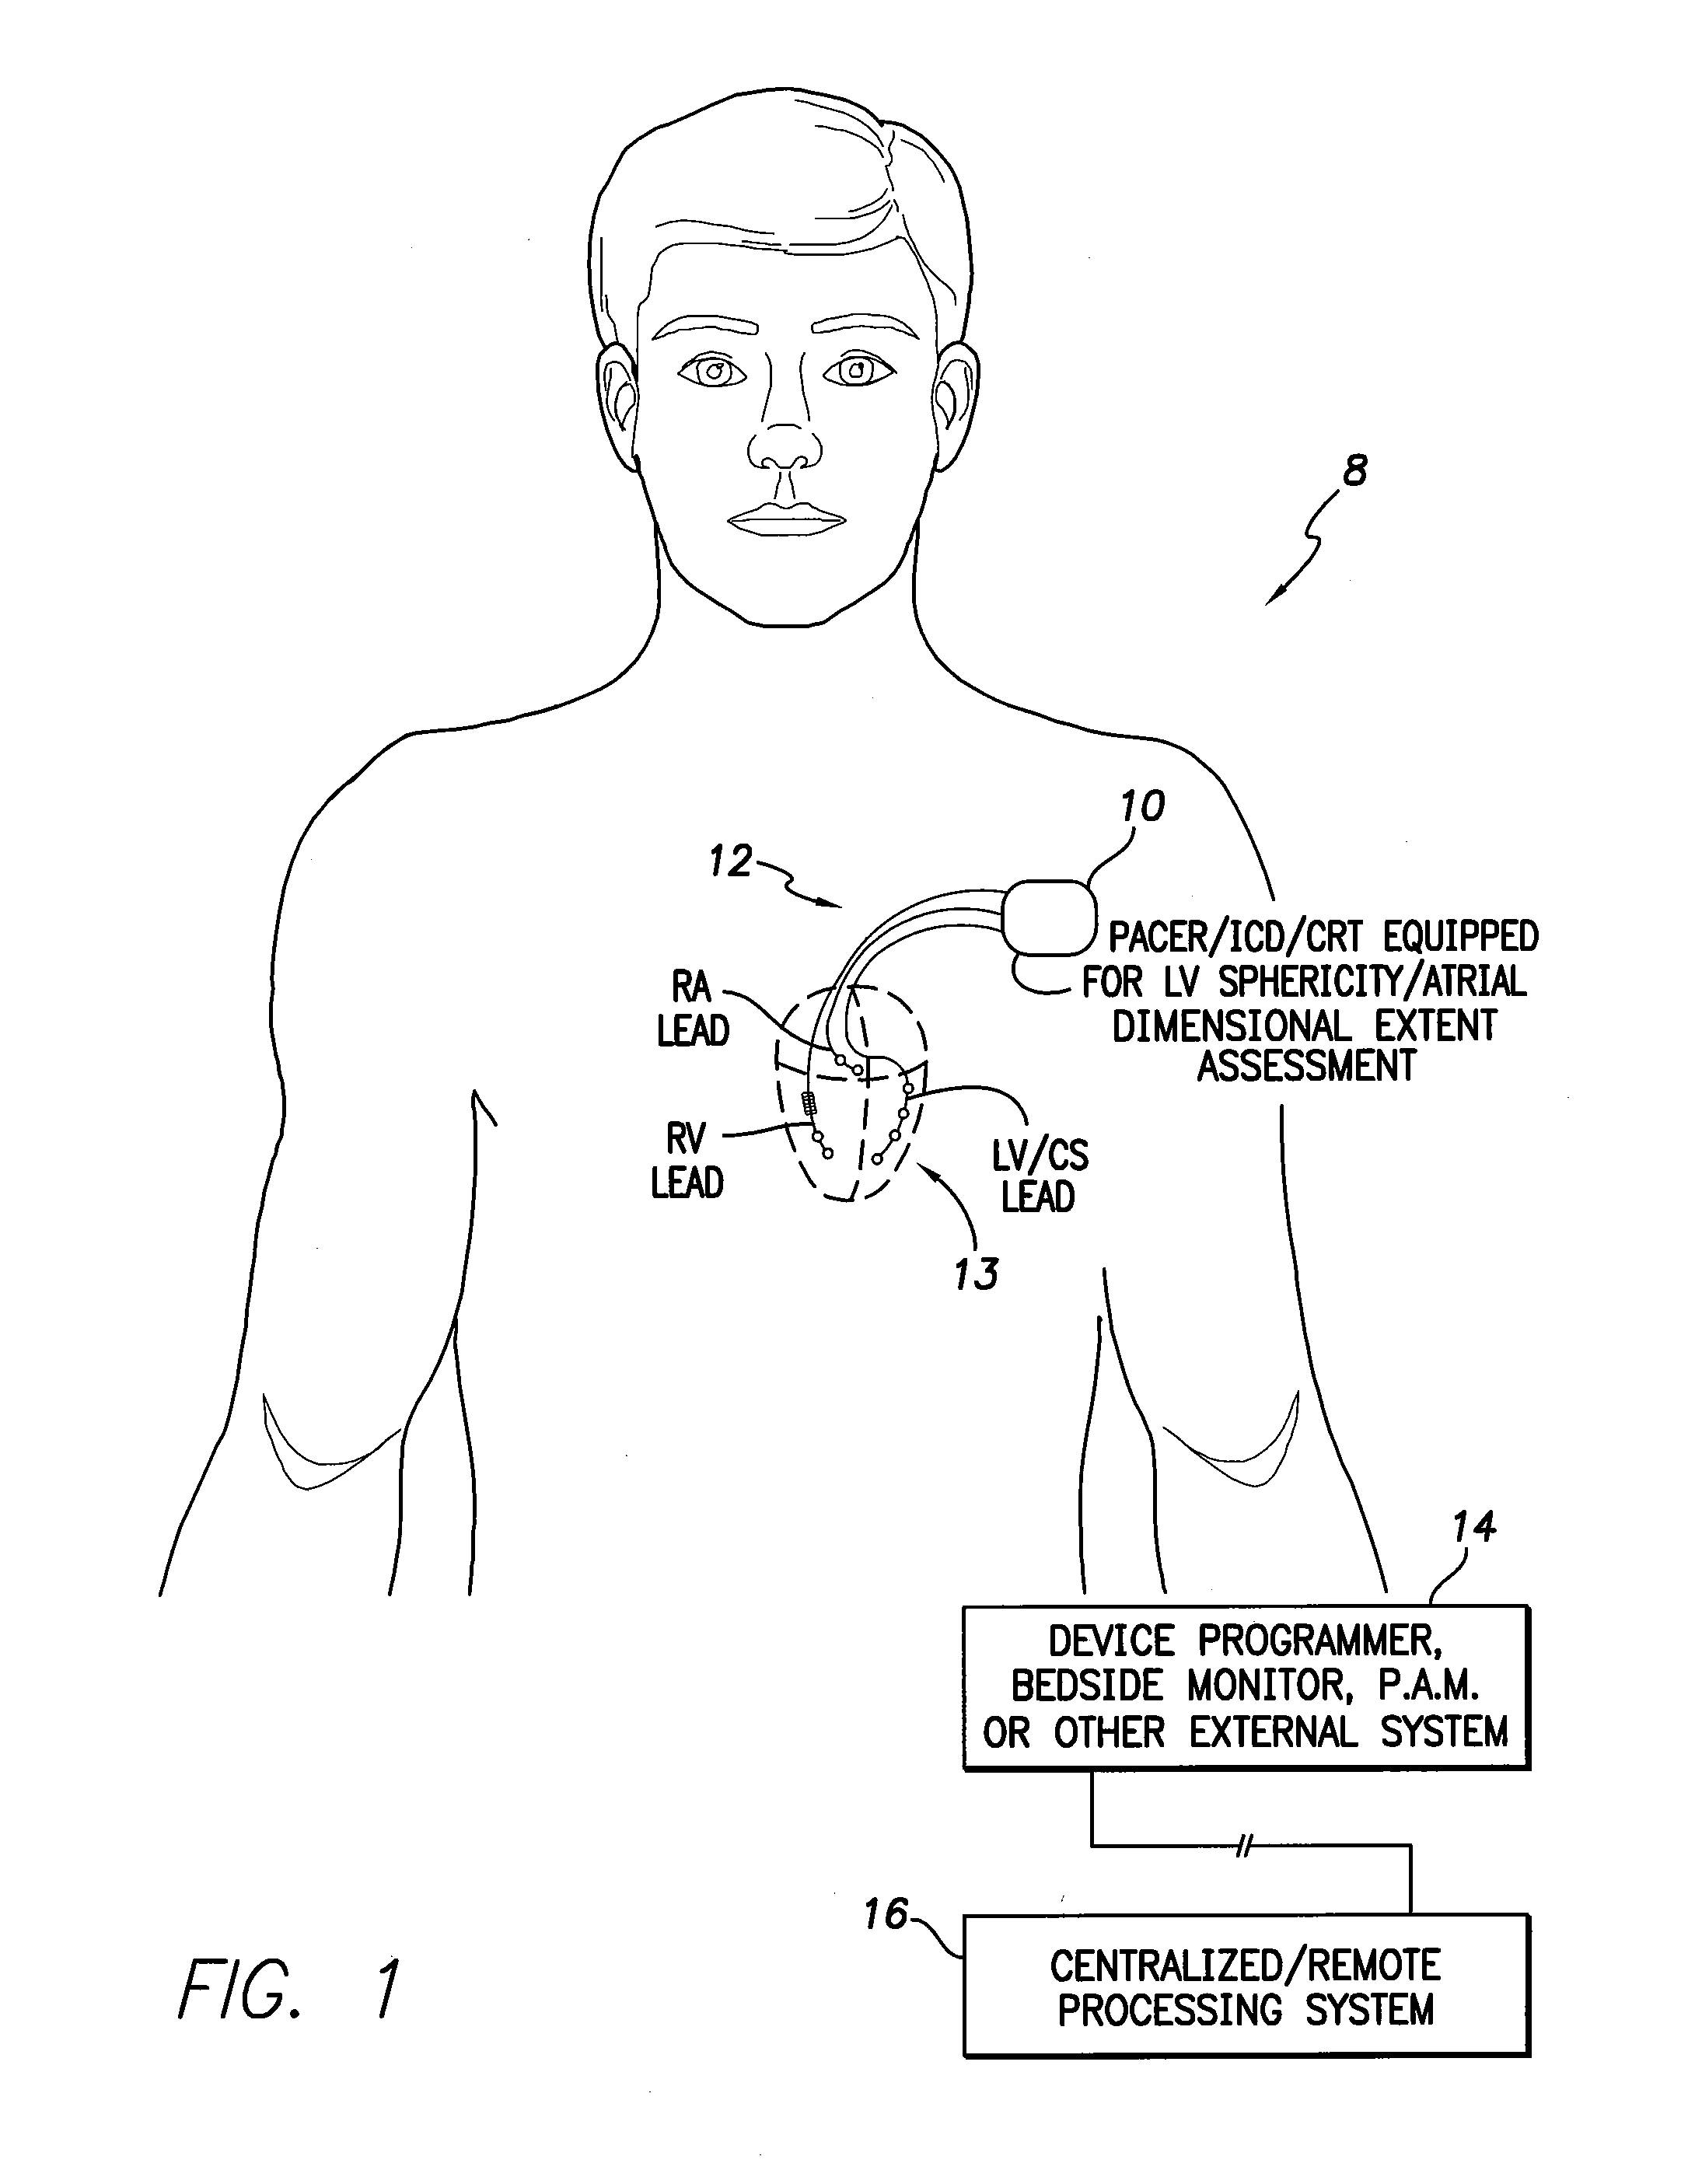 Systems and methods for assessing the sphericity and dimensional extent of heart chambers for use with an implantable medical device